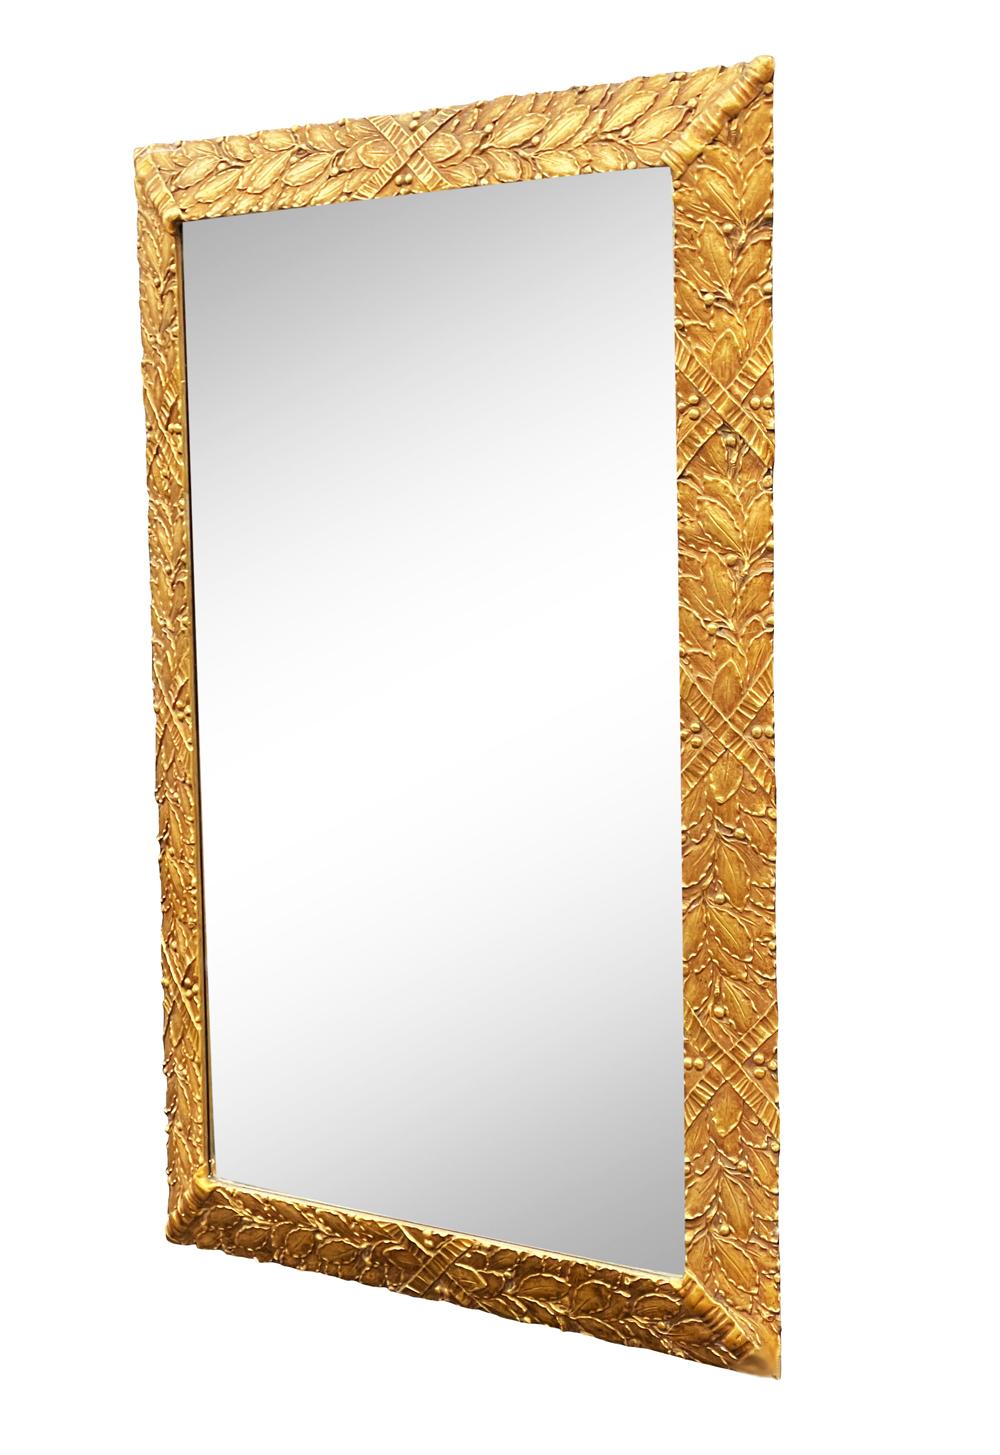 Hollywood Regency Large Italian Rectangular Mirror in Gold Gilded Carved Wood In Good Condition For Sale In Philadelphia, PA